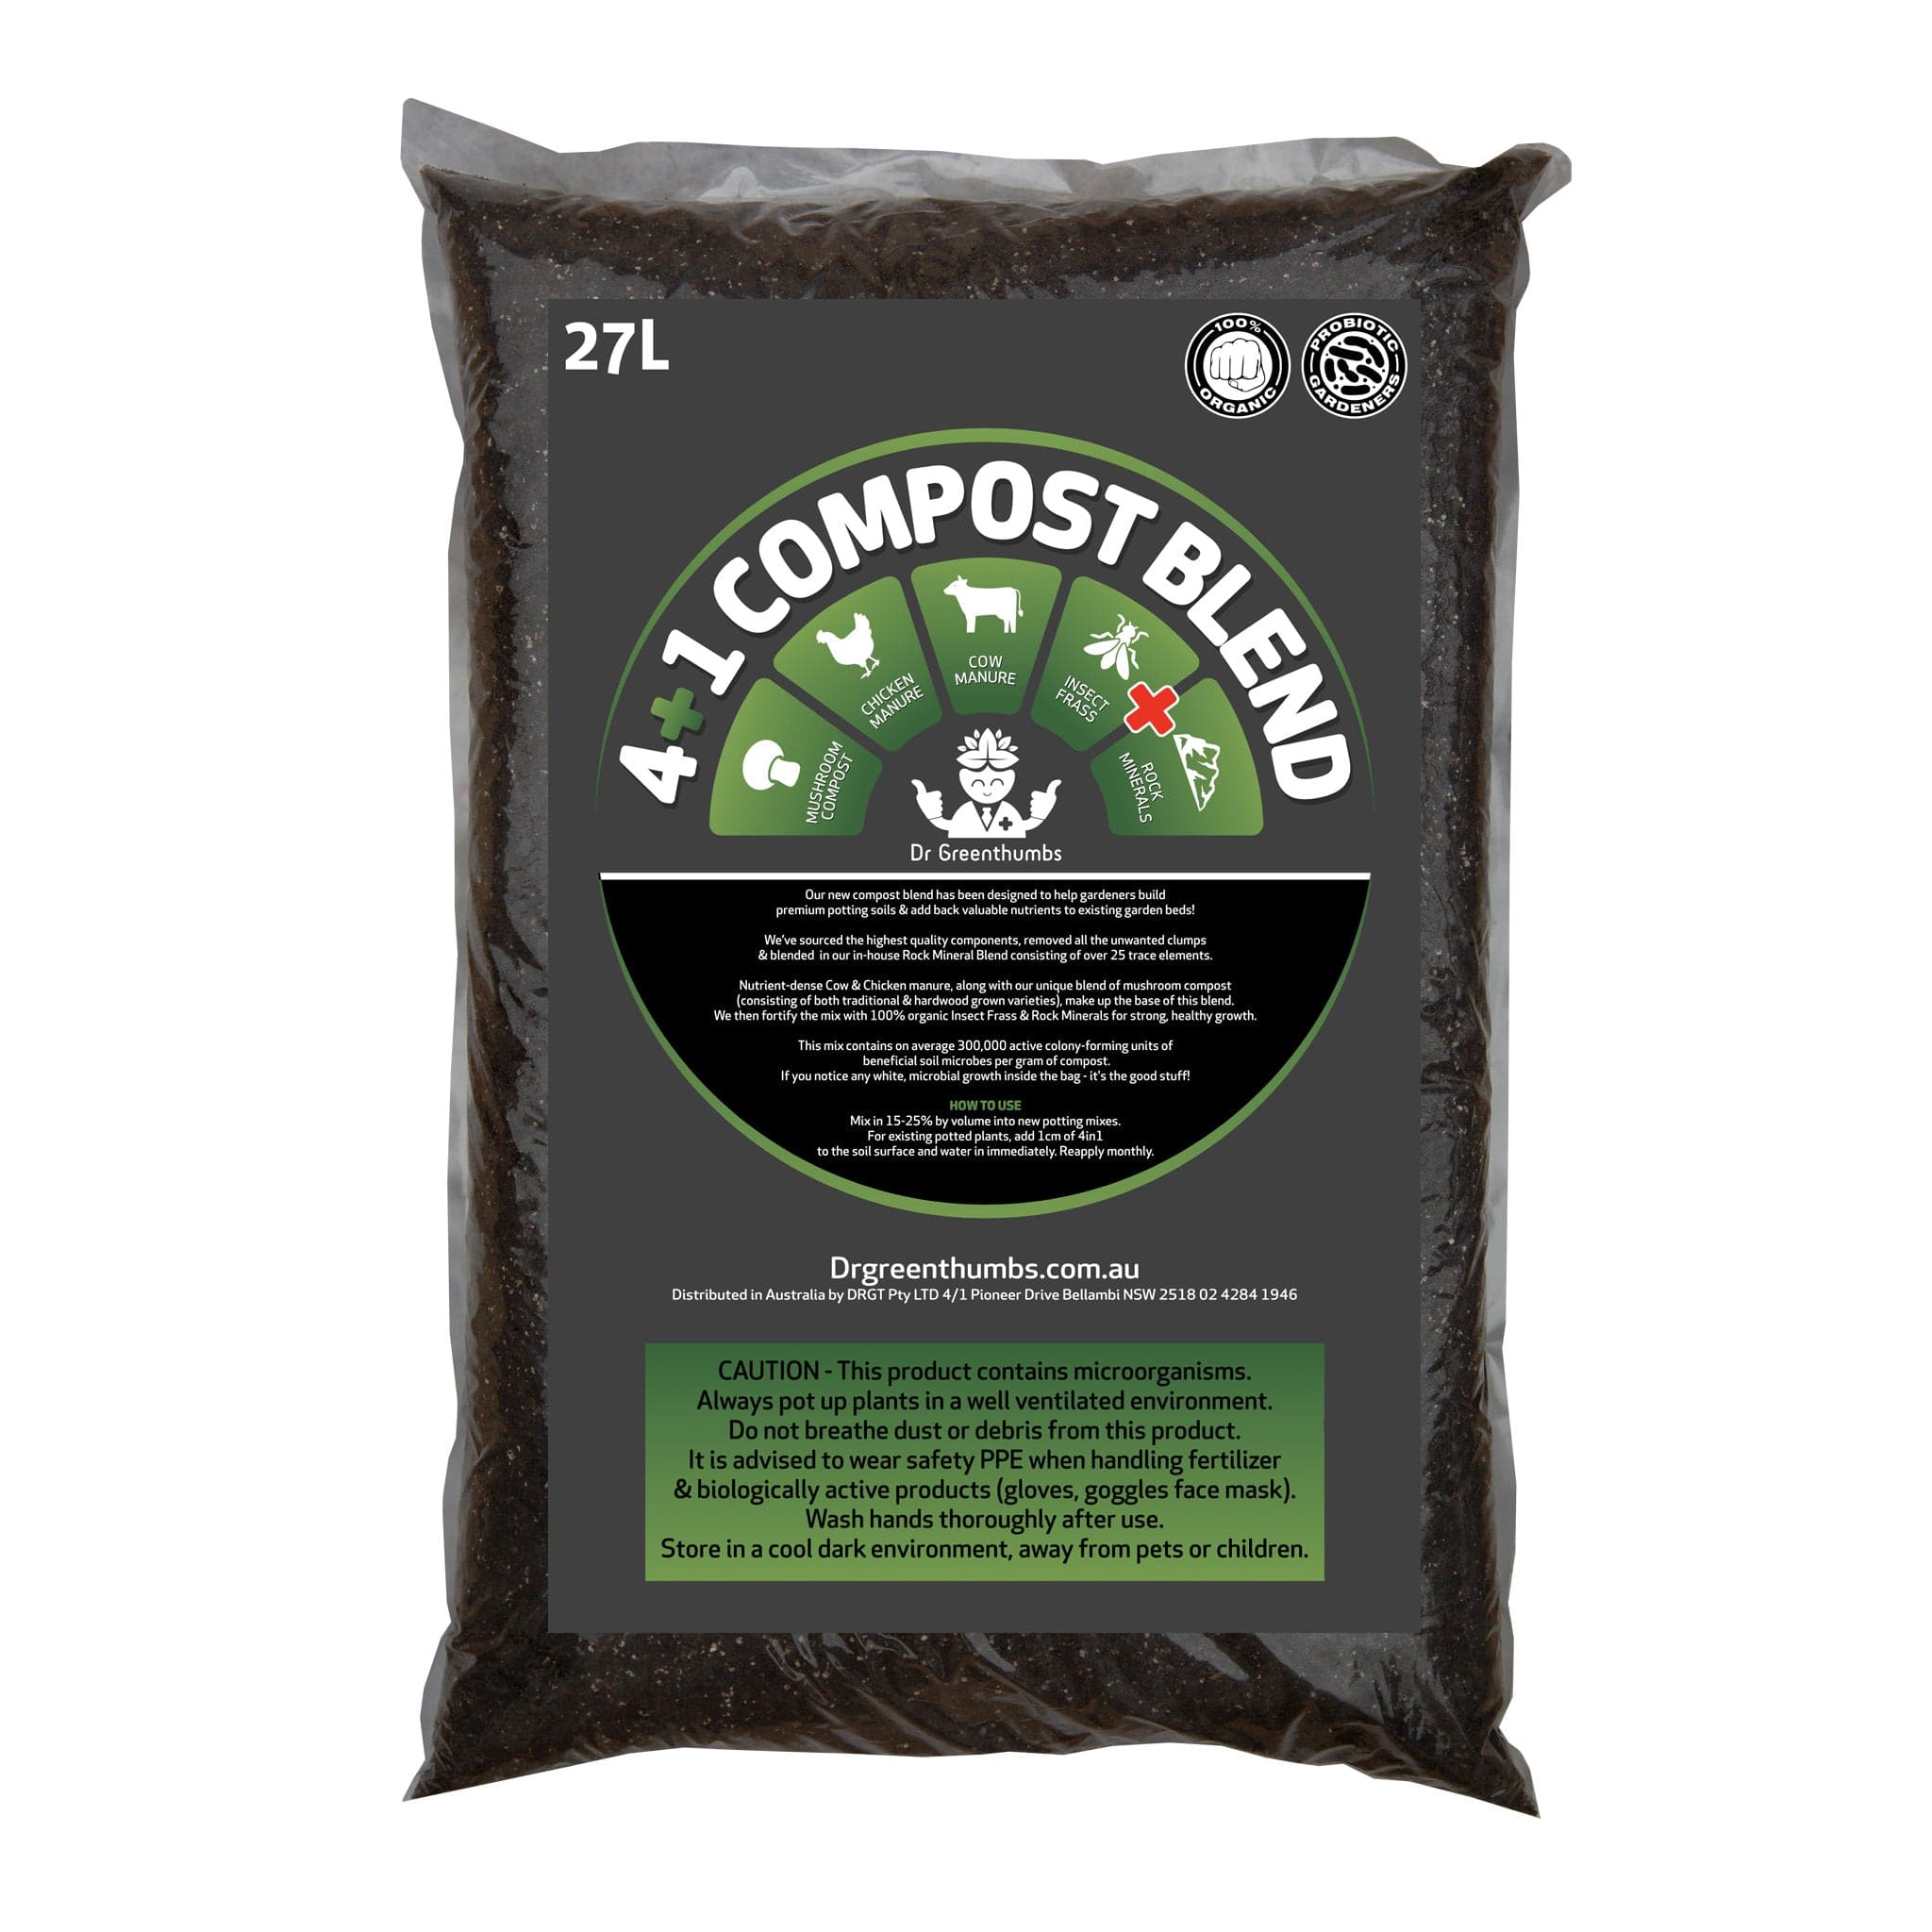 Dr Greenthumbs 4+1 Compost Blend (Insect Frass - Rock Minerals + More - 8L / 27L)